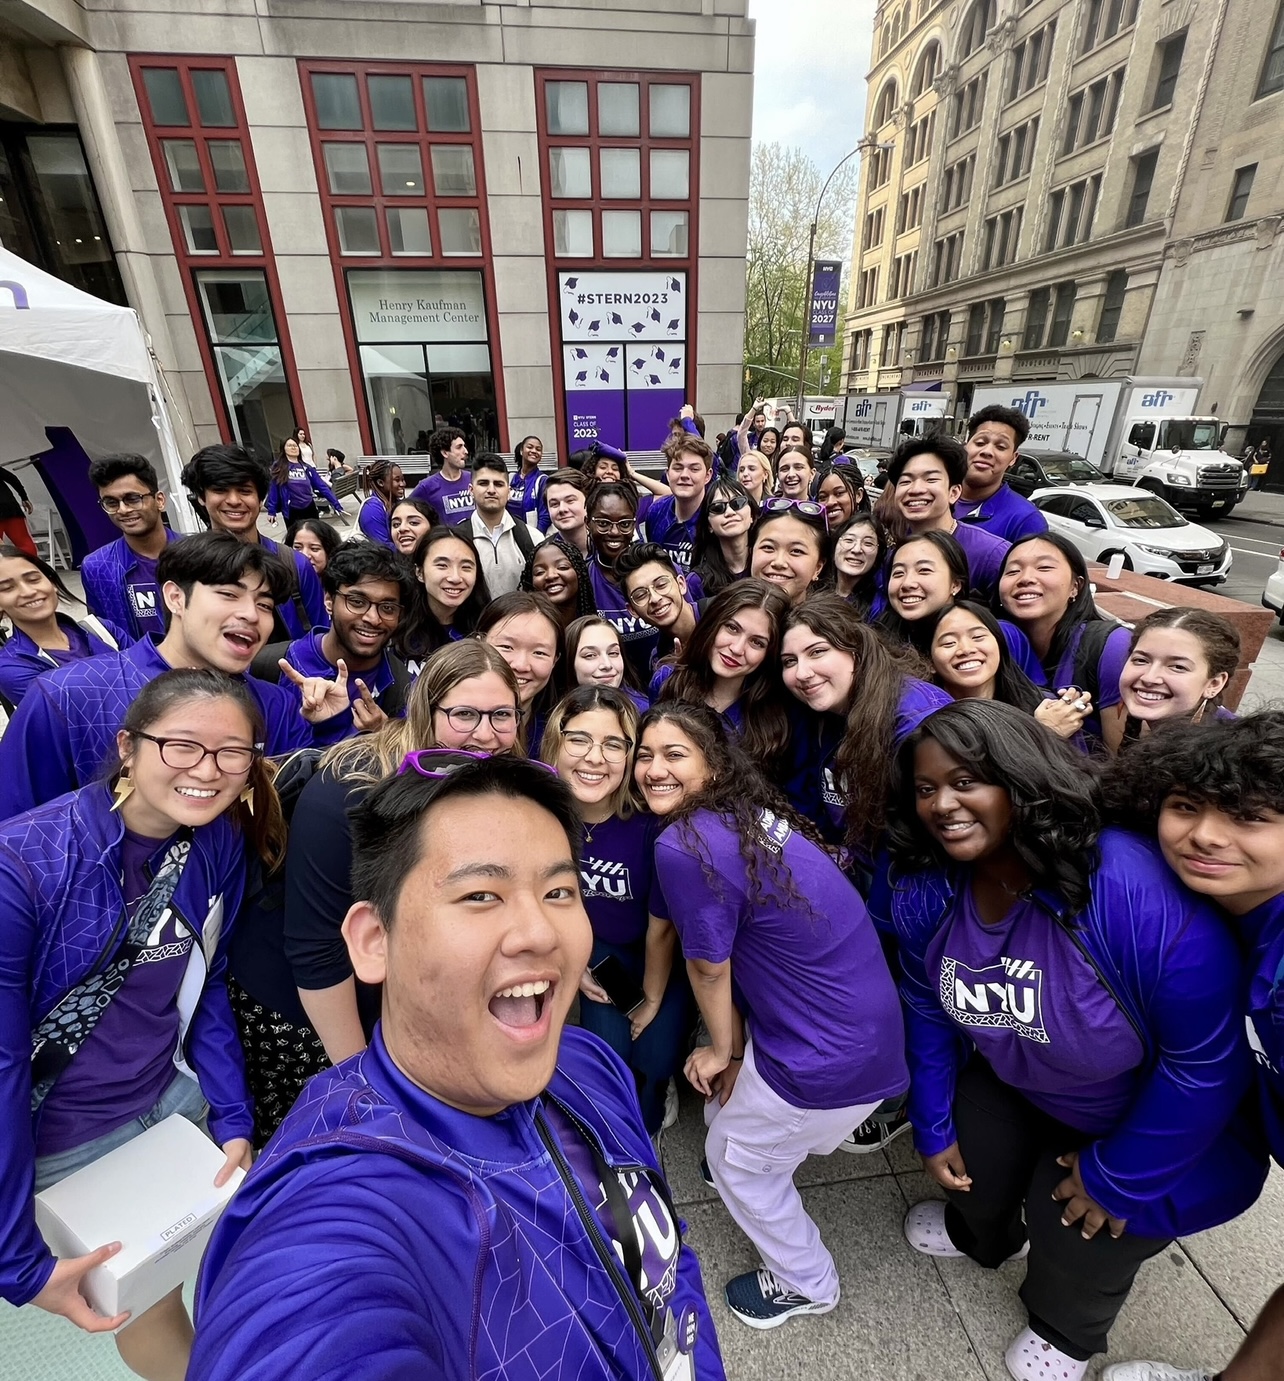 Dozens of purple jacketed student ambassadors pose for selfies